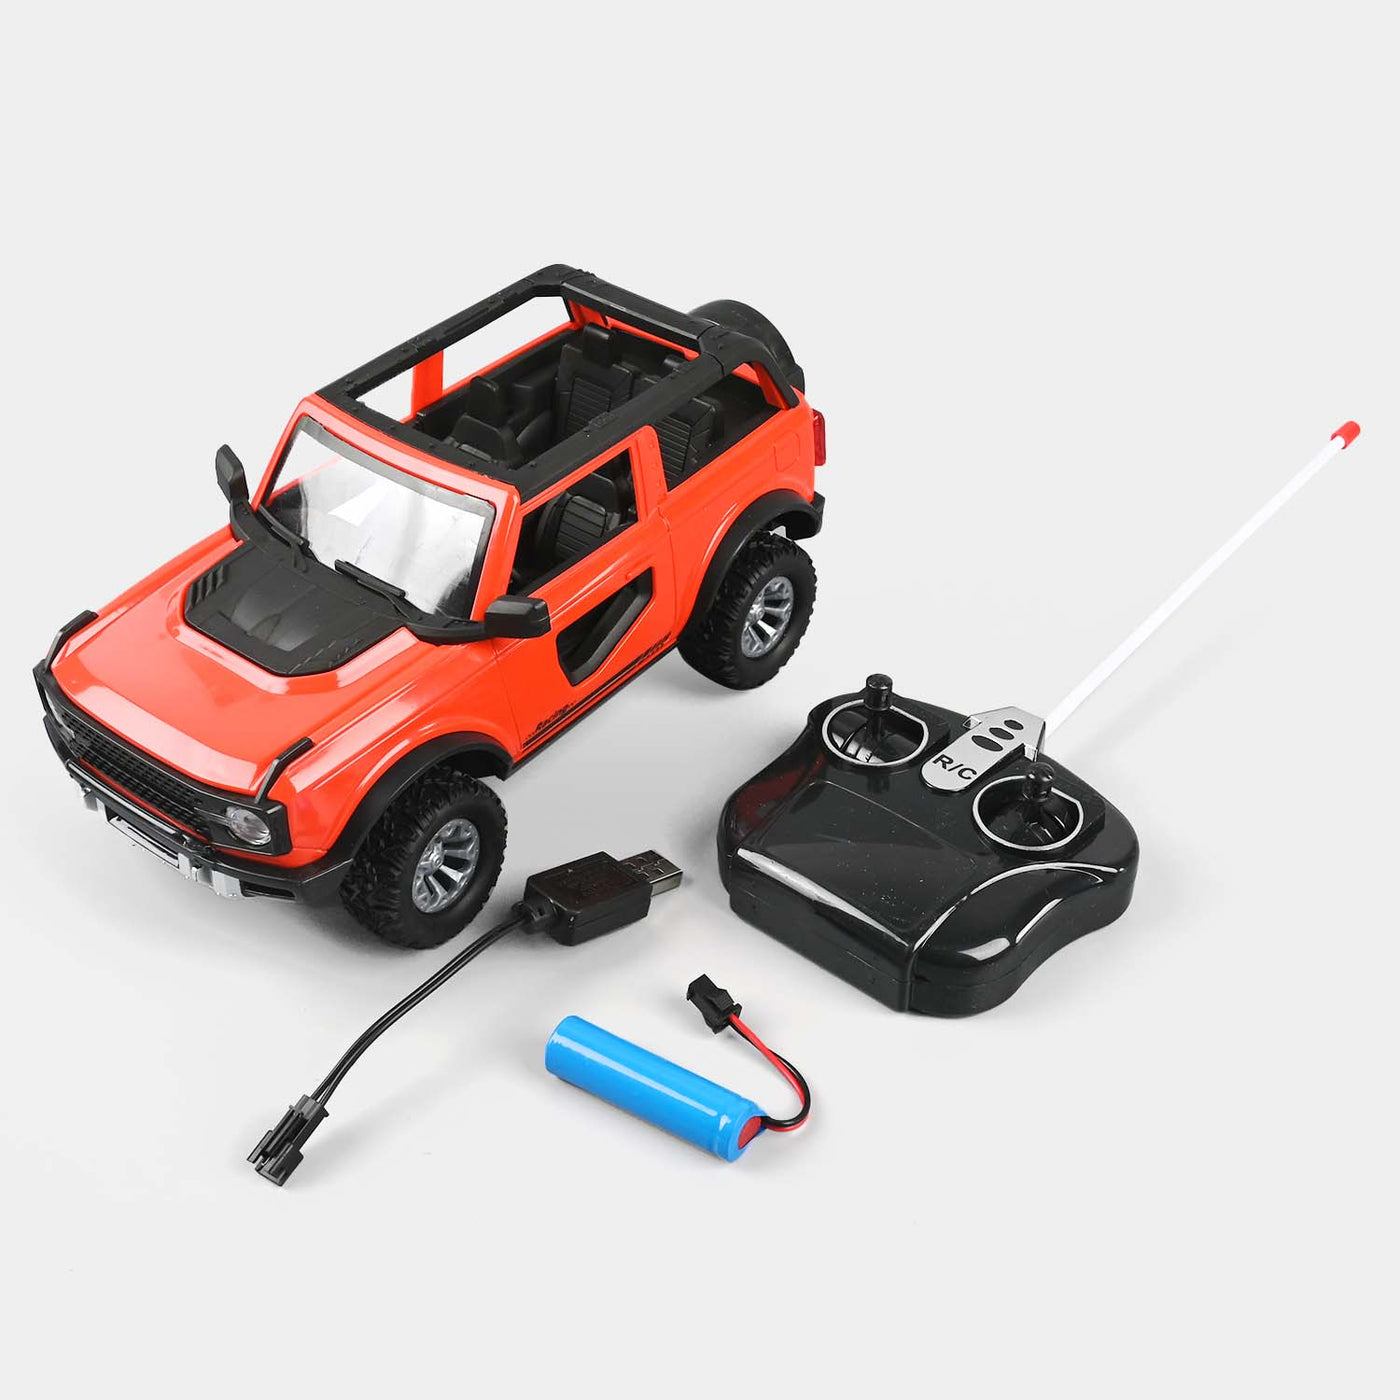 REMOTE CONTROL OFF ROAD VEHICLE FOR KIDS